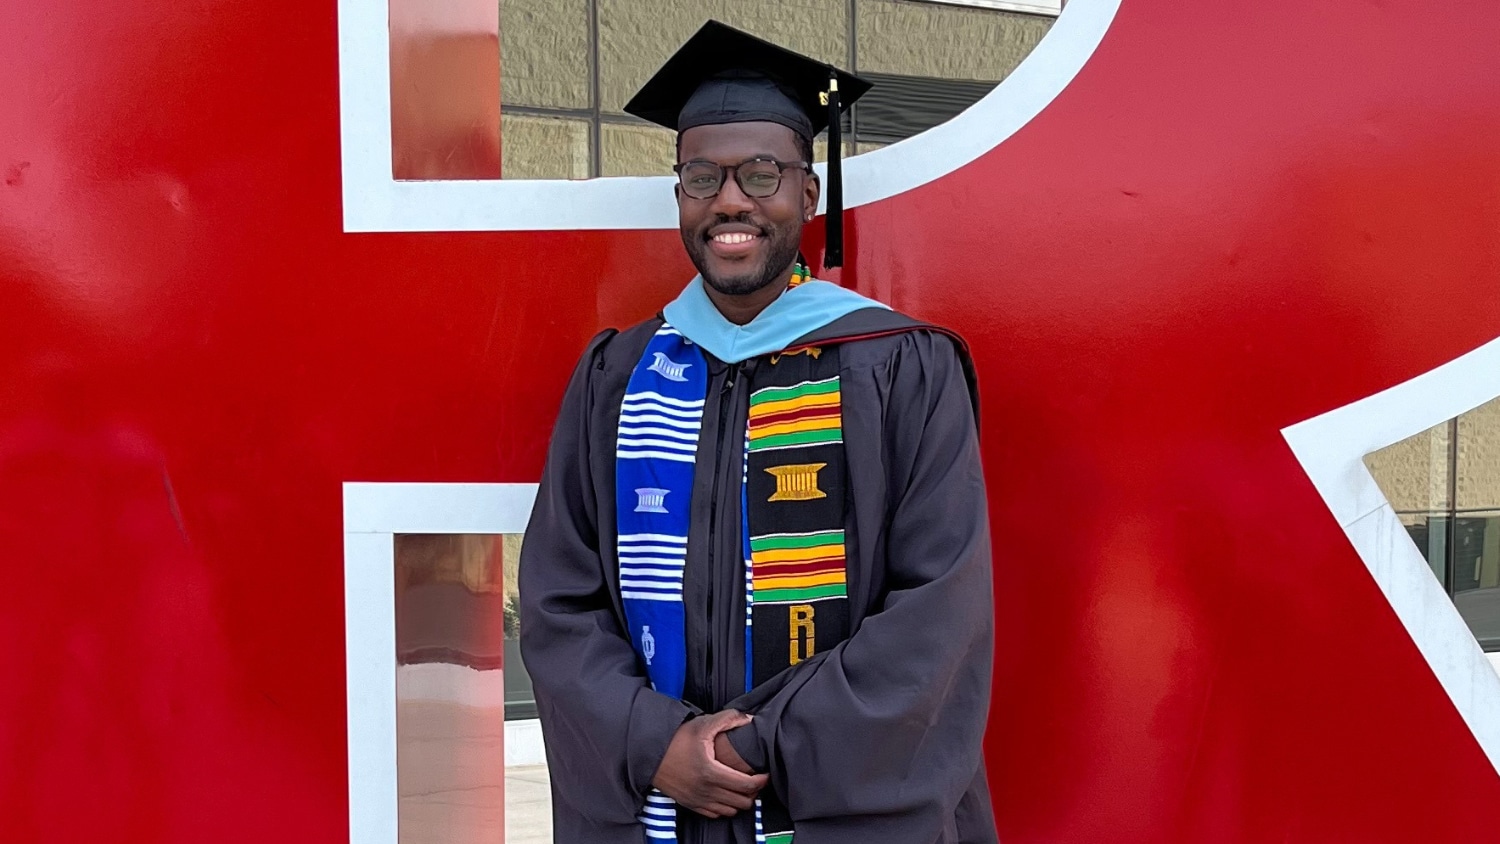 Portrait of Alcedos Vanterpool wearing a cap and gown when he graduated from Rutgers with his master's degree.